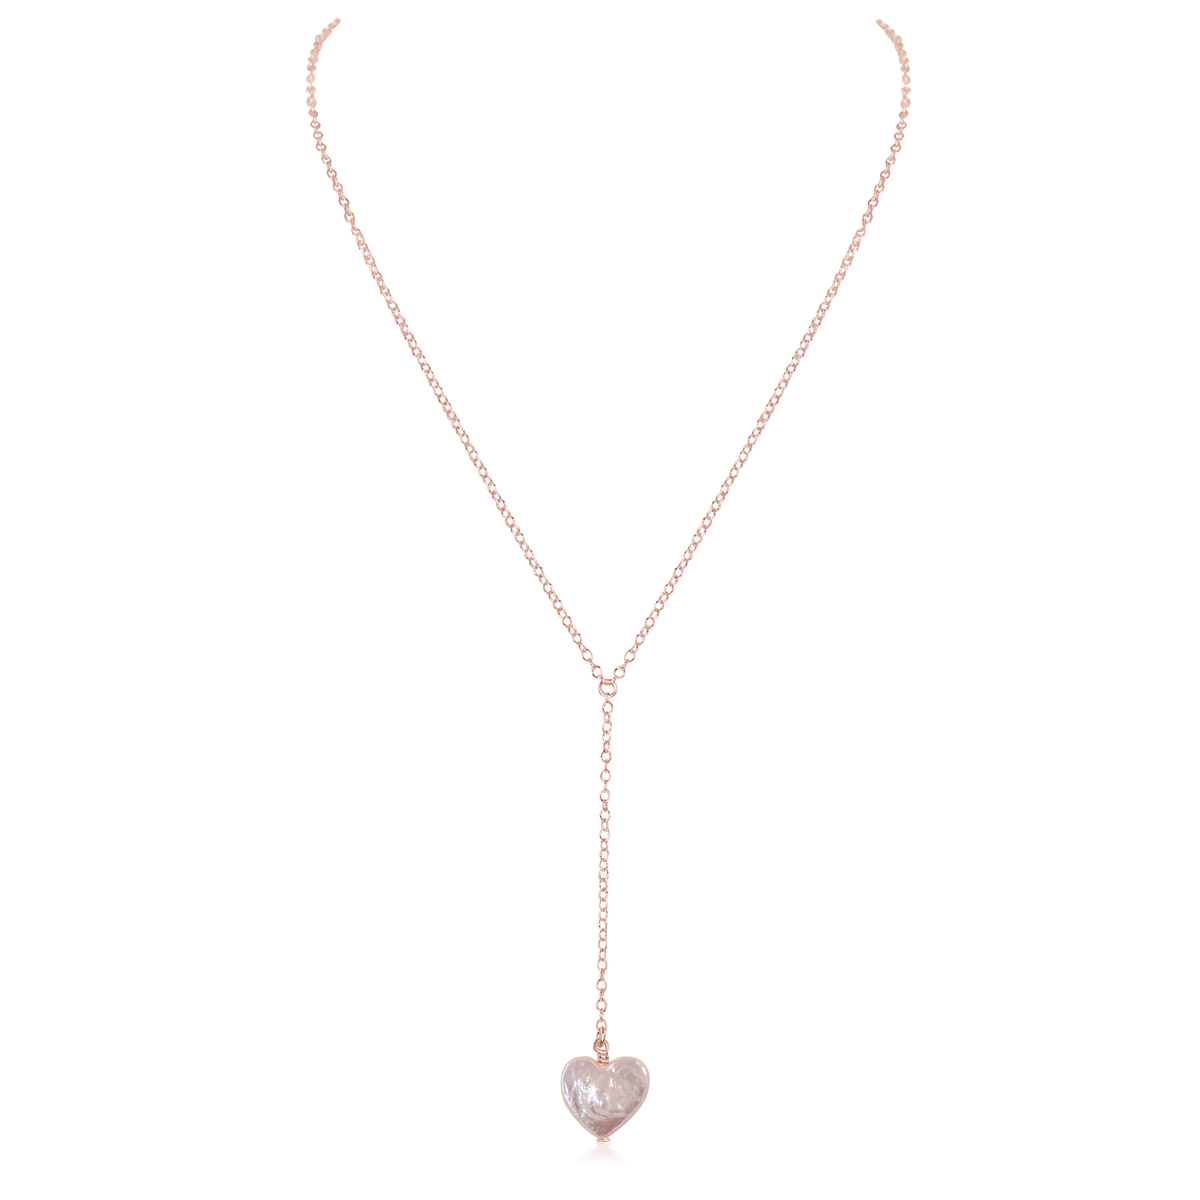 Freshwater Pearl Heart Lariat Necklace - Freshwater Pearl Heart Lariat Necklace - 14k Rose Gold Fill - Luna Tide Handmade Crystal Jewellery